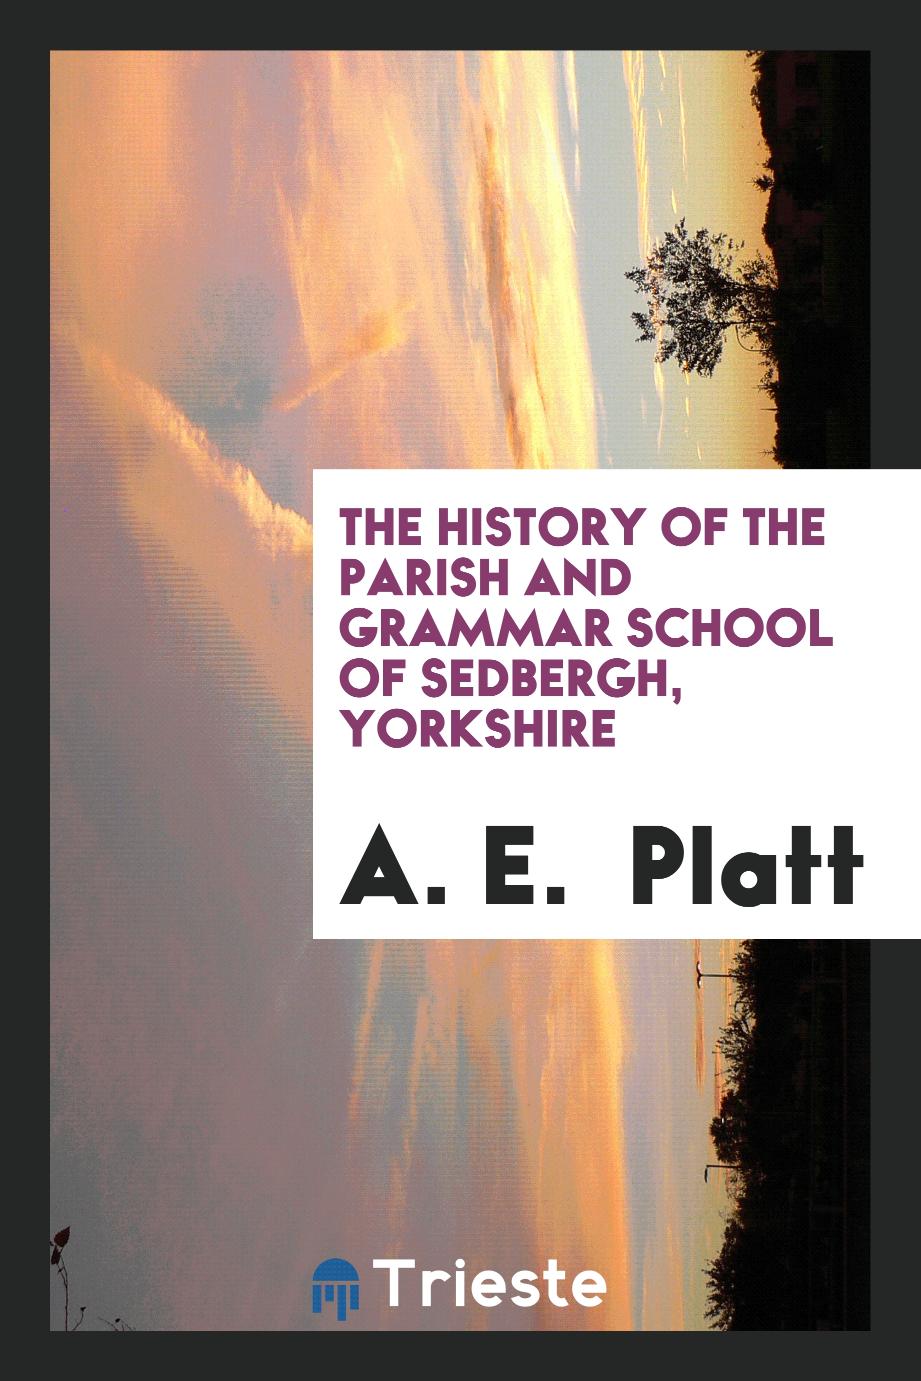 The history of the parish and grammar school of Sedbergh, Yorkshire